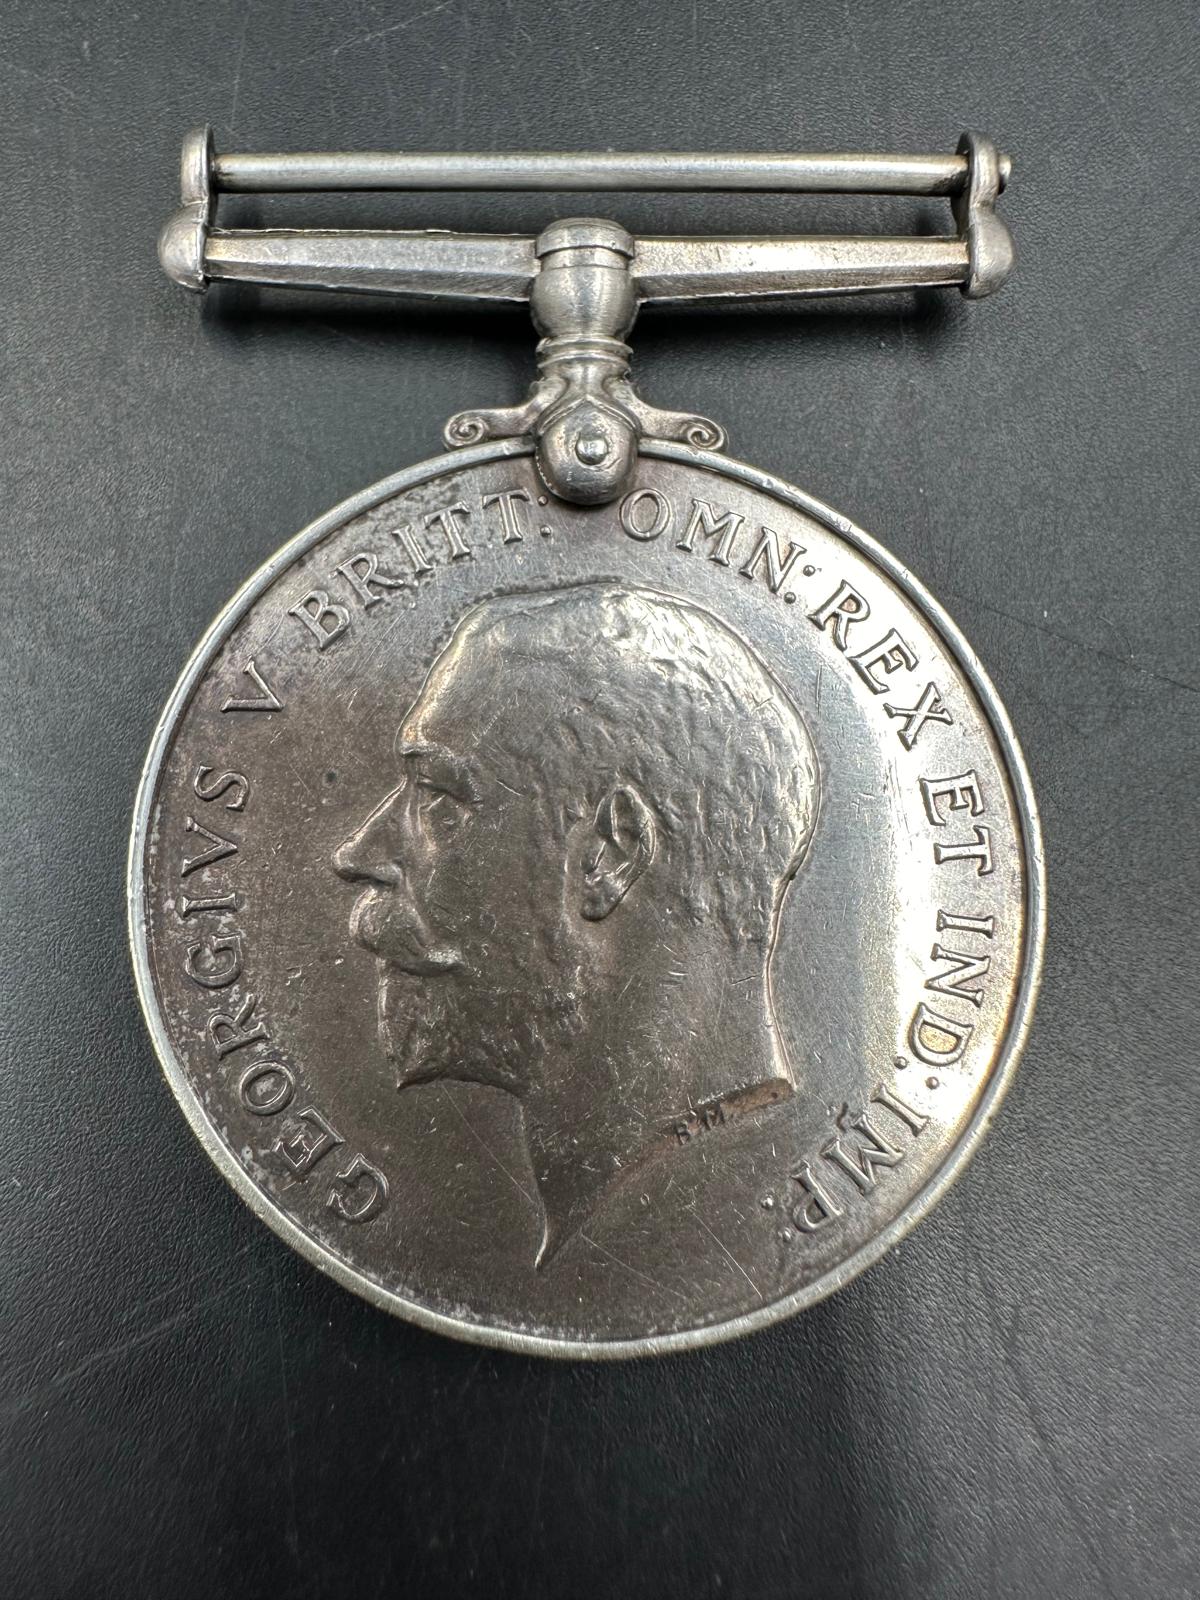 Militaria: WWII Defence Medal, WWI Great War Medal 102418 DVR T G Wilson, RA and a 1914-1918 medal 2 - Image 4 of 4